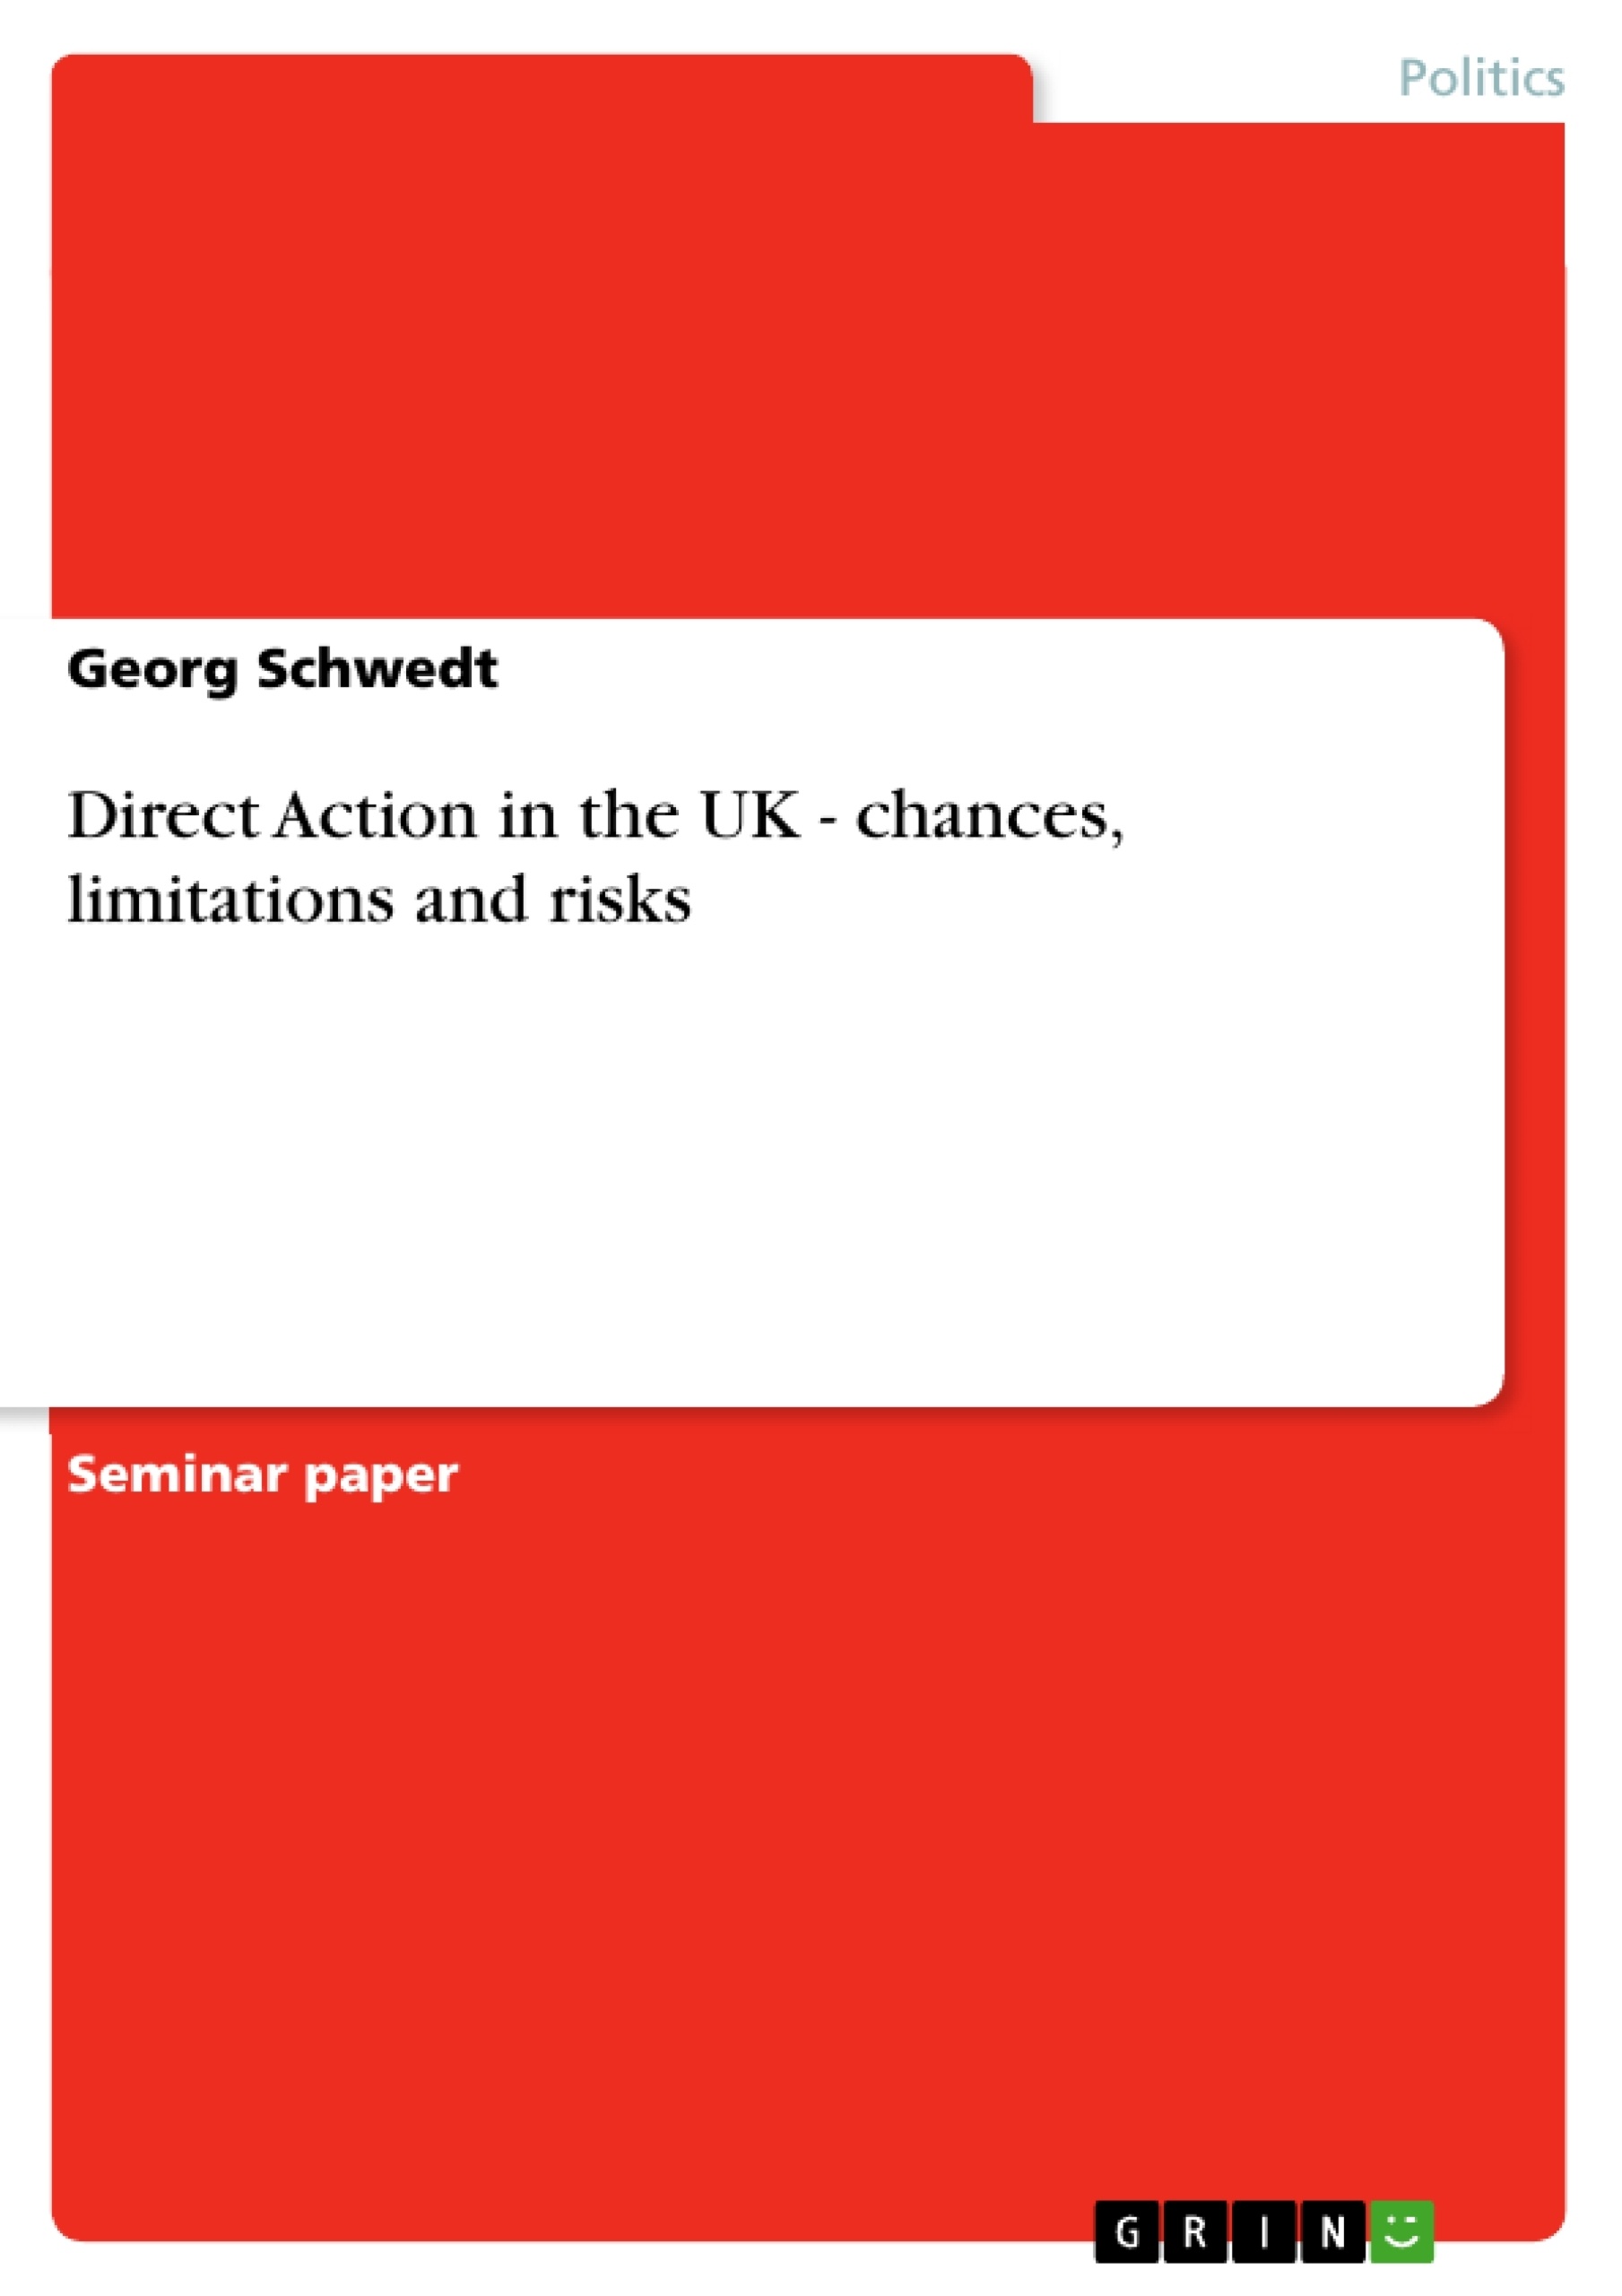 Title: Direct Action in the UK - chances, limitations and risks